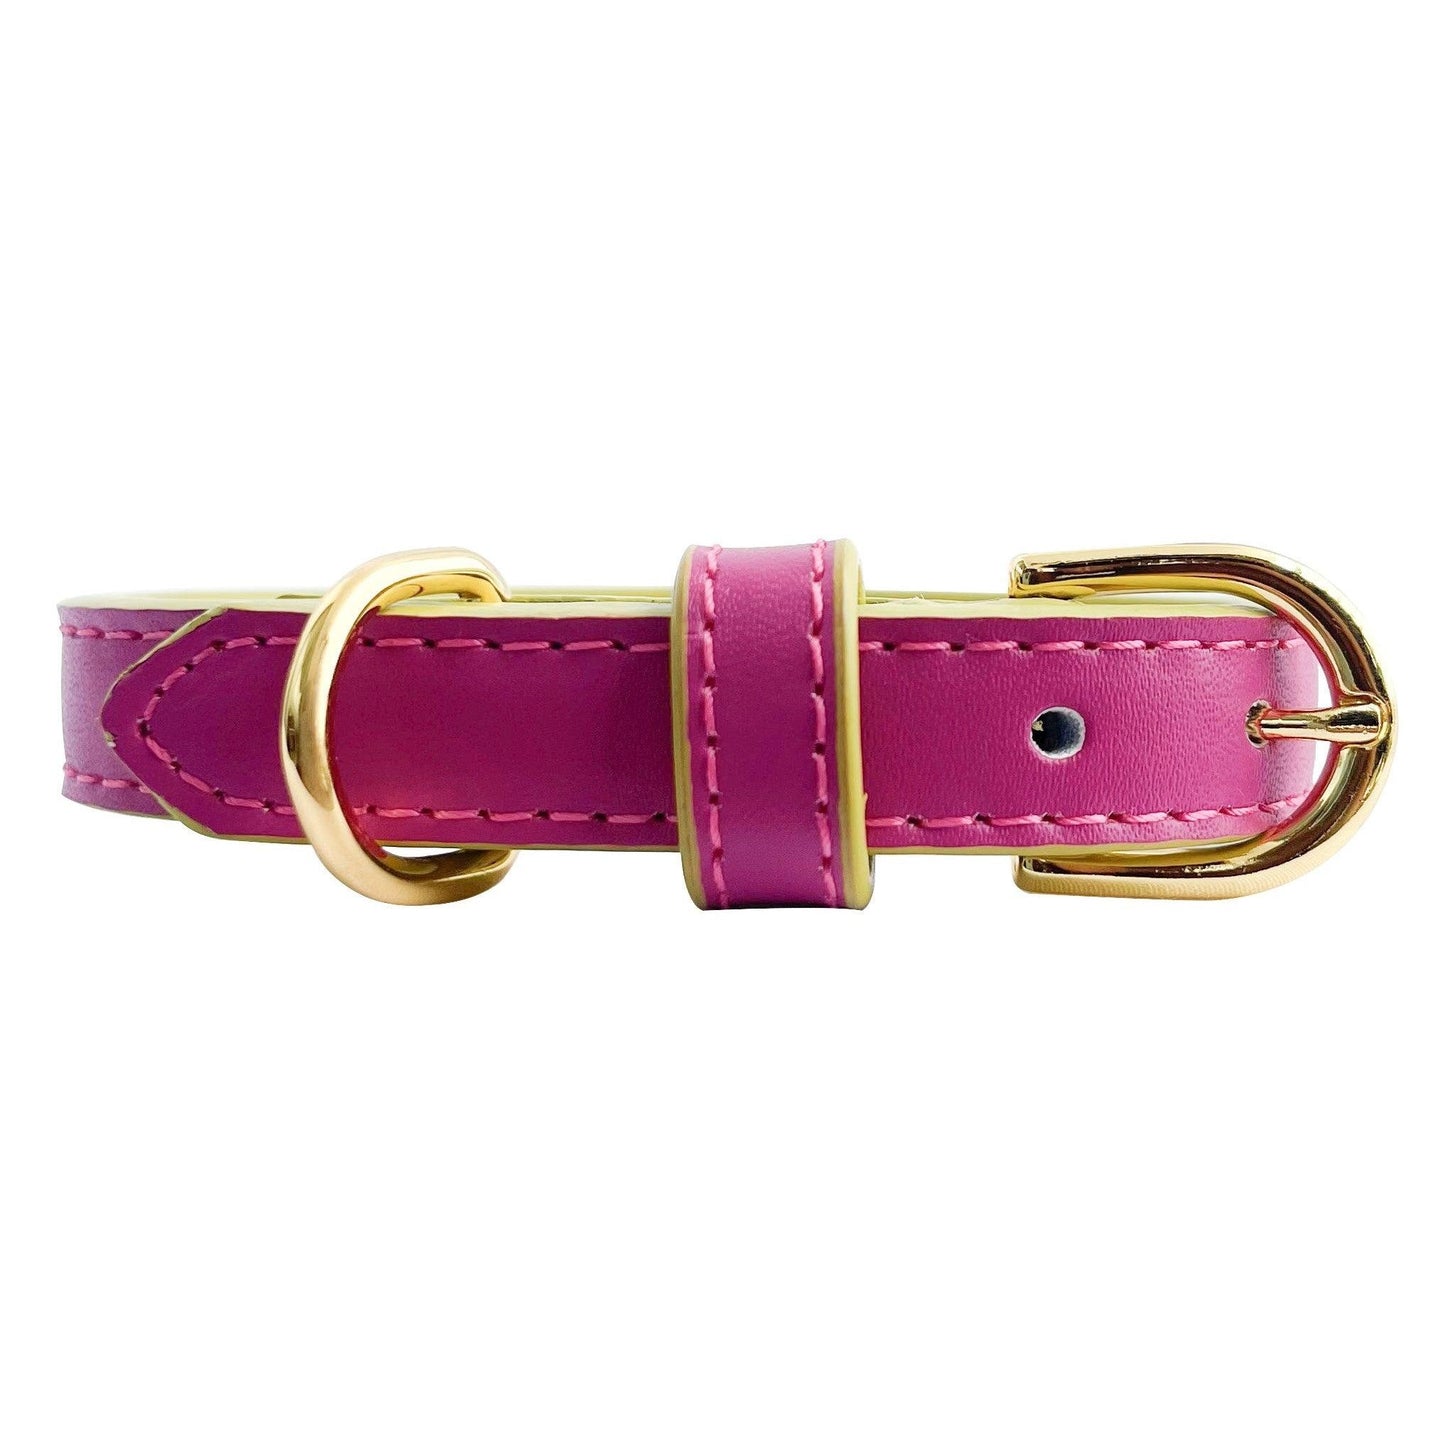 Anthea Dog Collar in Dark Pink with Yellow Trimmings